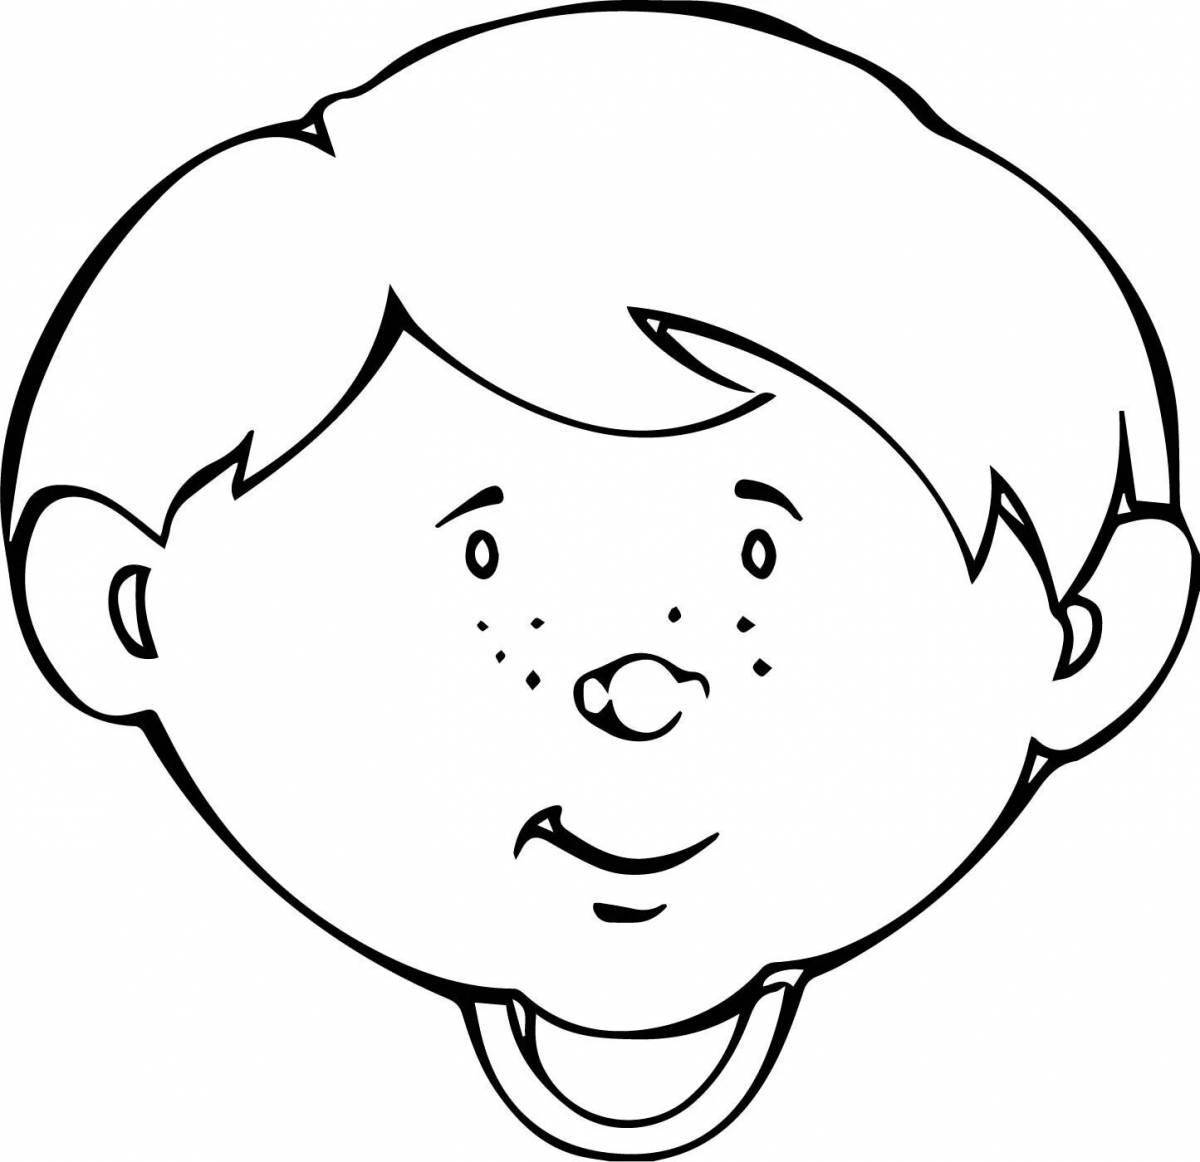 Innovative human face coloring page for kids